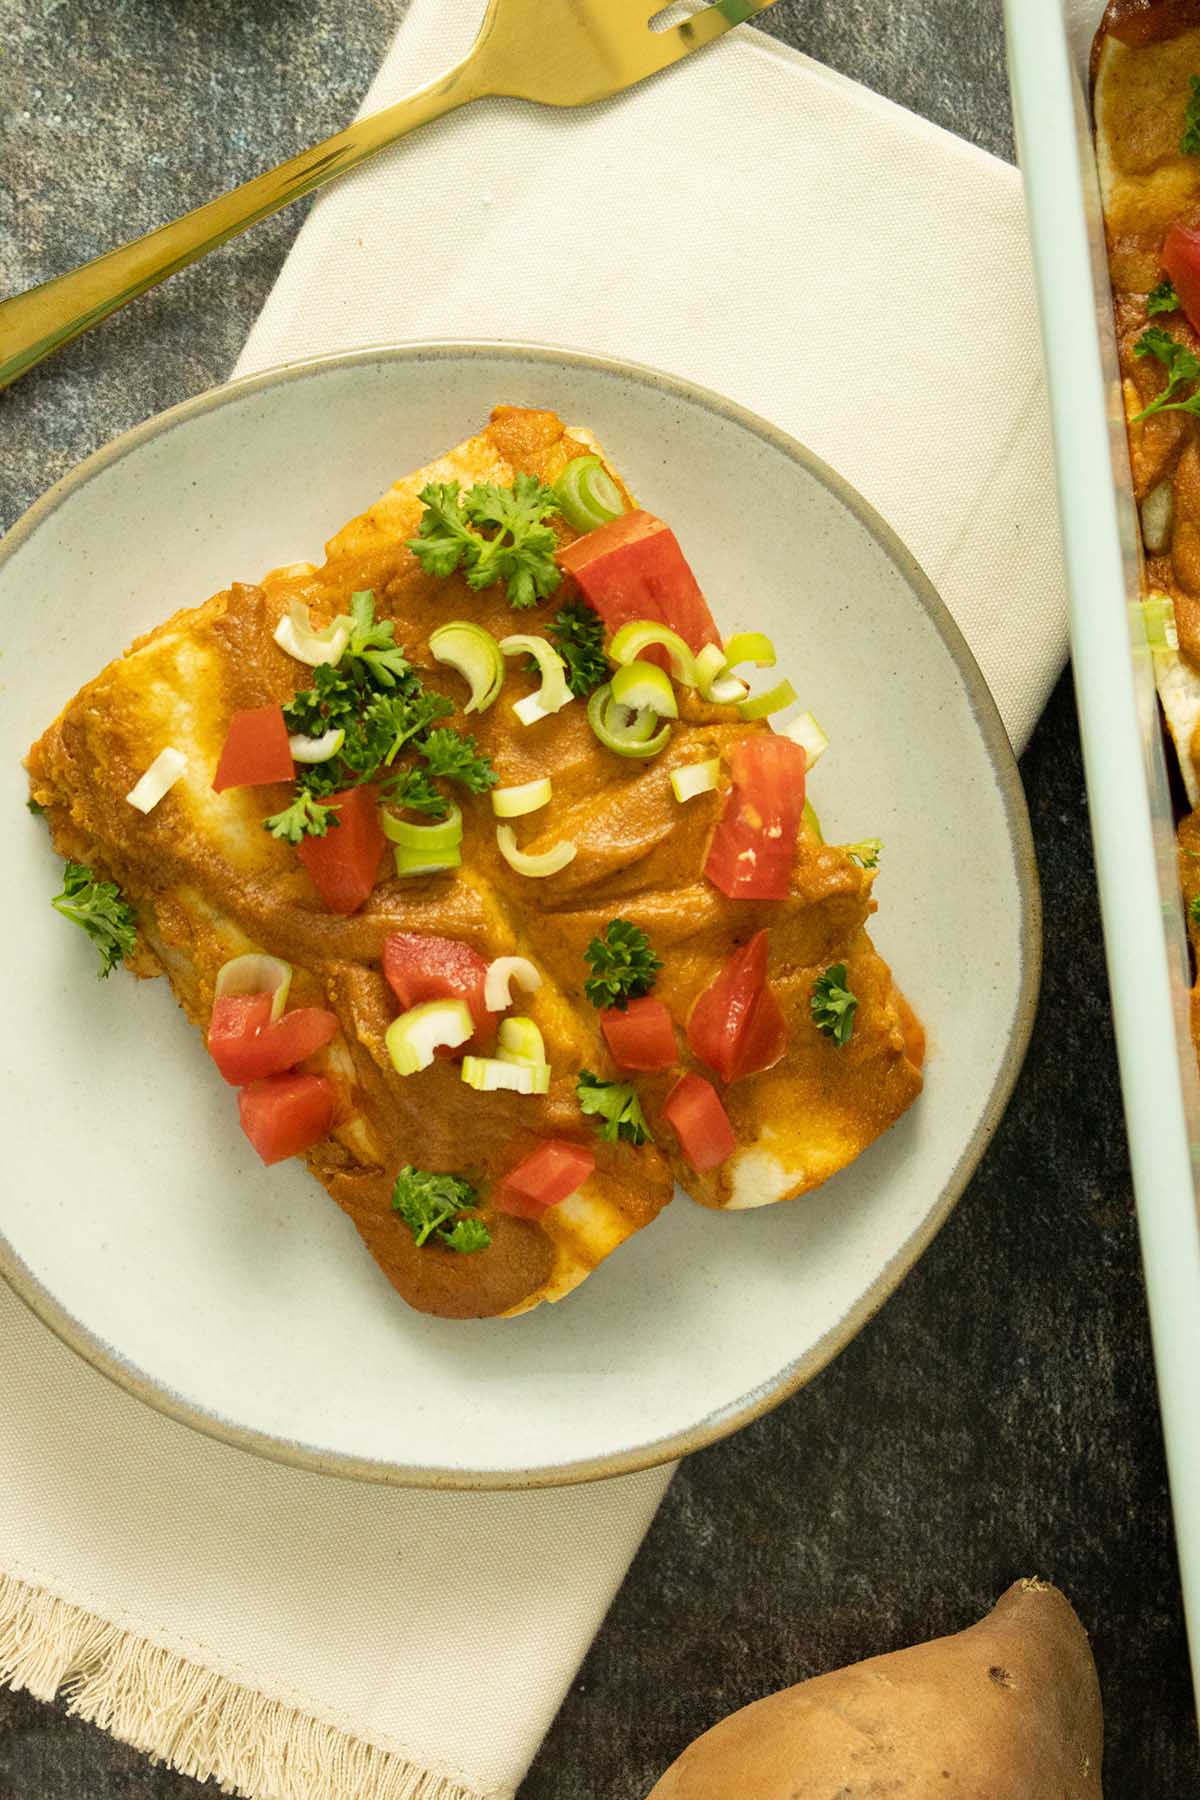 two rolled up enchiladas on a plate next to the baking pan